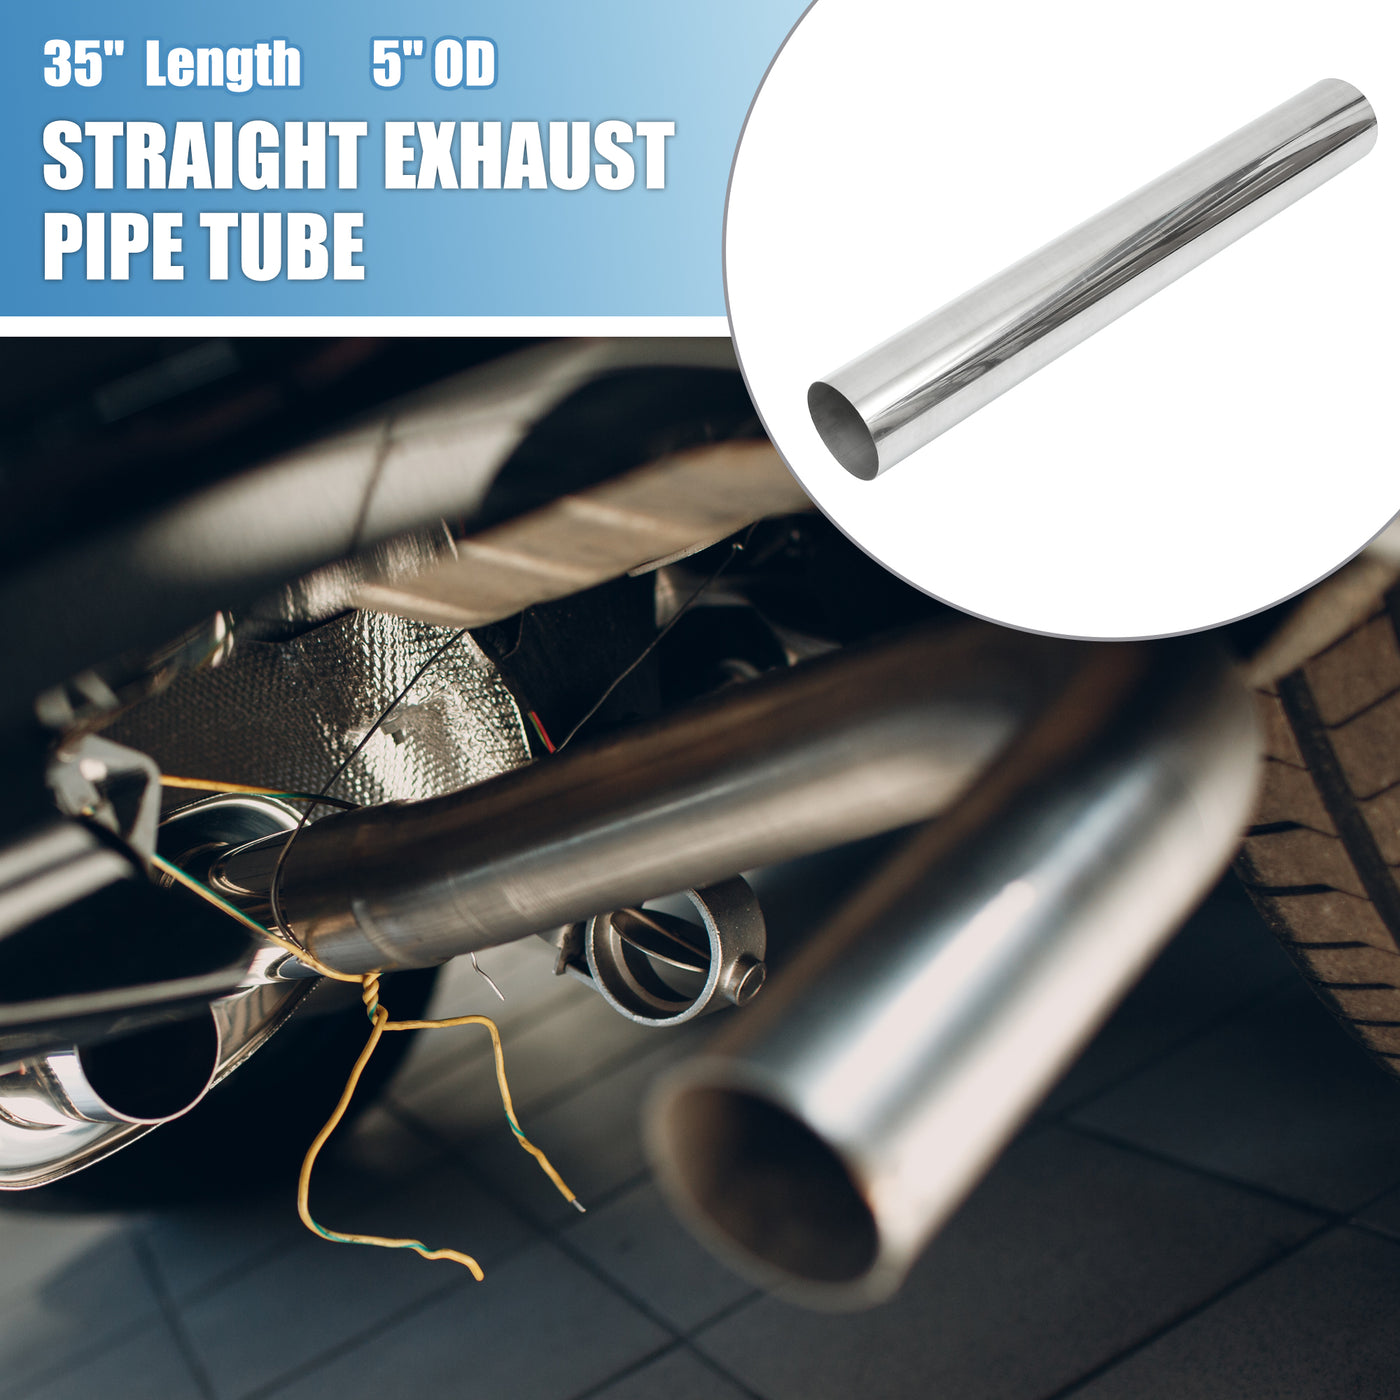 A ABSOPRO Car Mandrel Exhaust Pipe Tube Durable 35" Length 5' OD Straight Exhaust Tube DIY Custom 0 Degree Modified Piping T304 Stainless Steel Silver Tone